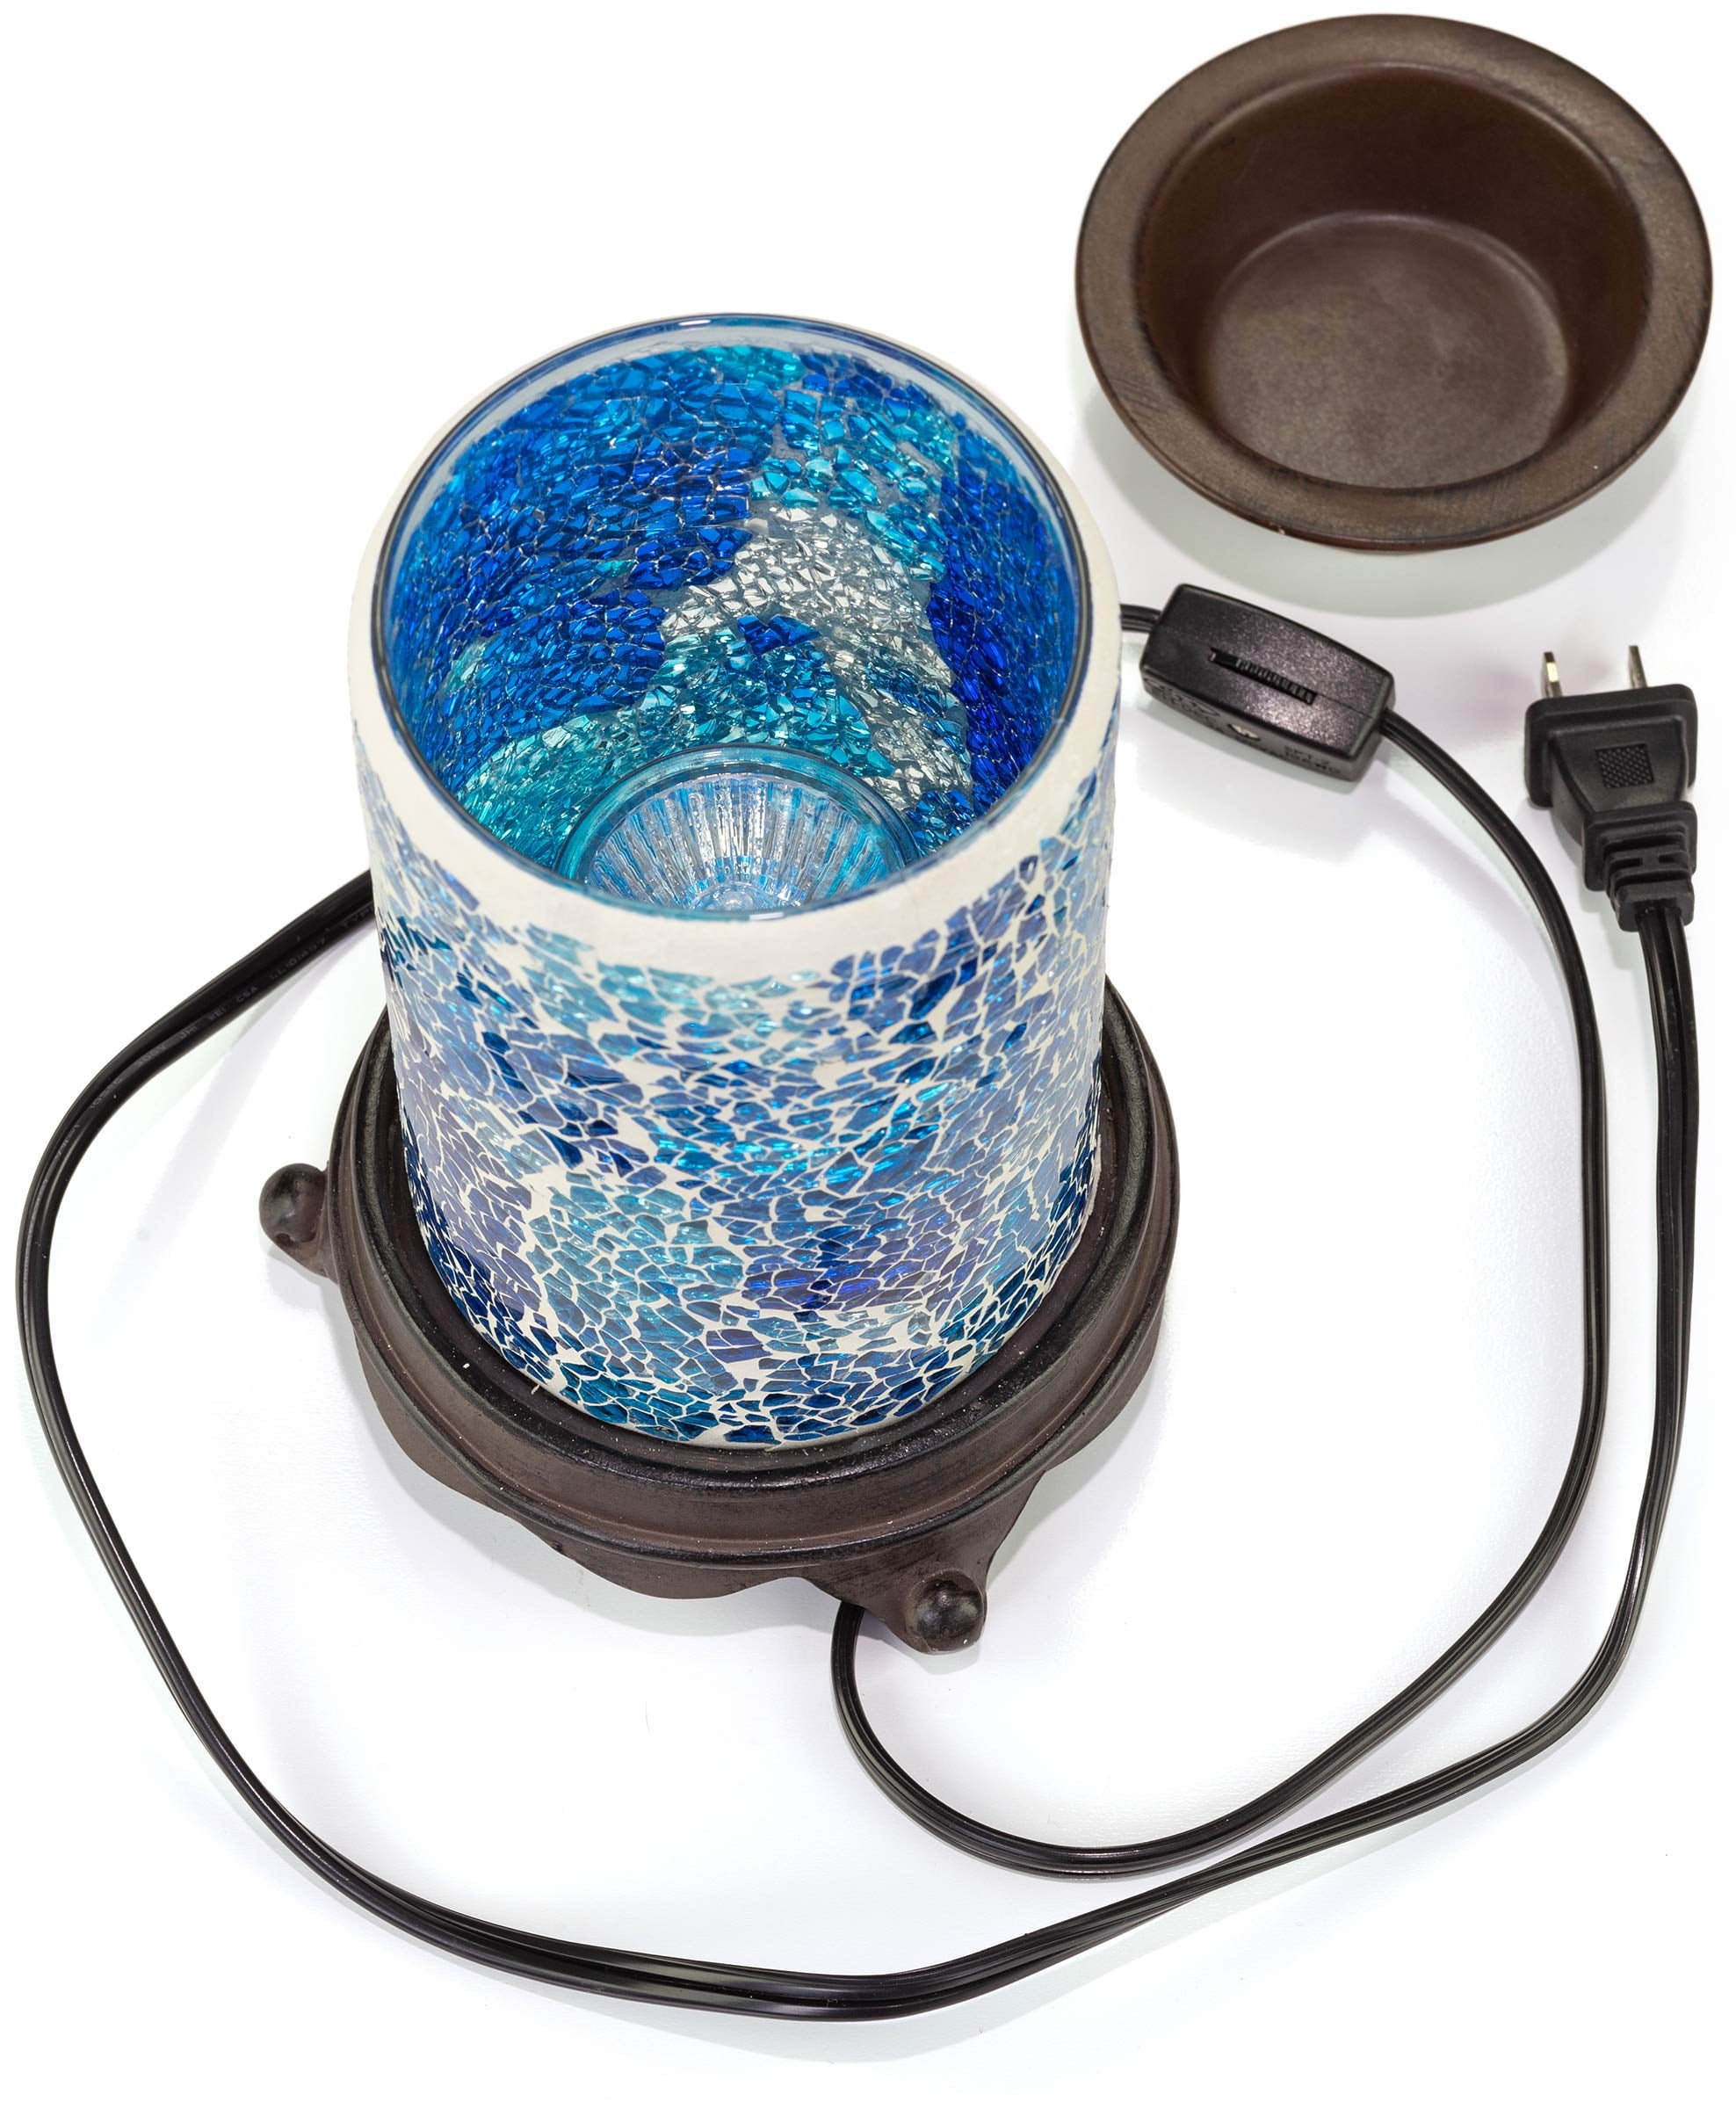 VP Home Mosaic Glass Wax Warmer, Gleaming Silver Tile, Electric Home  Fragrance, 0.79 H 5.2 L 1.38 W - Foods Co.